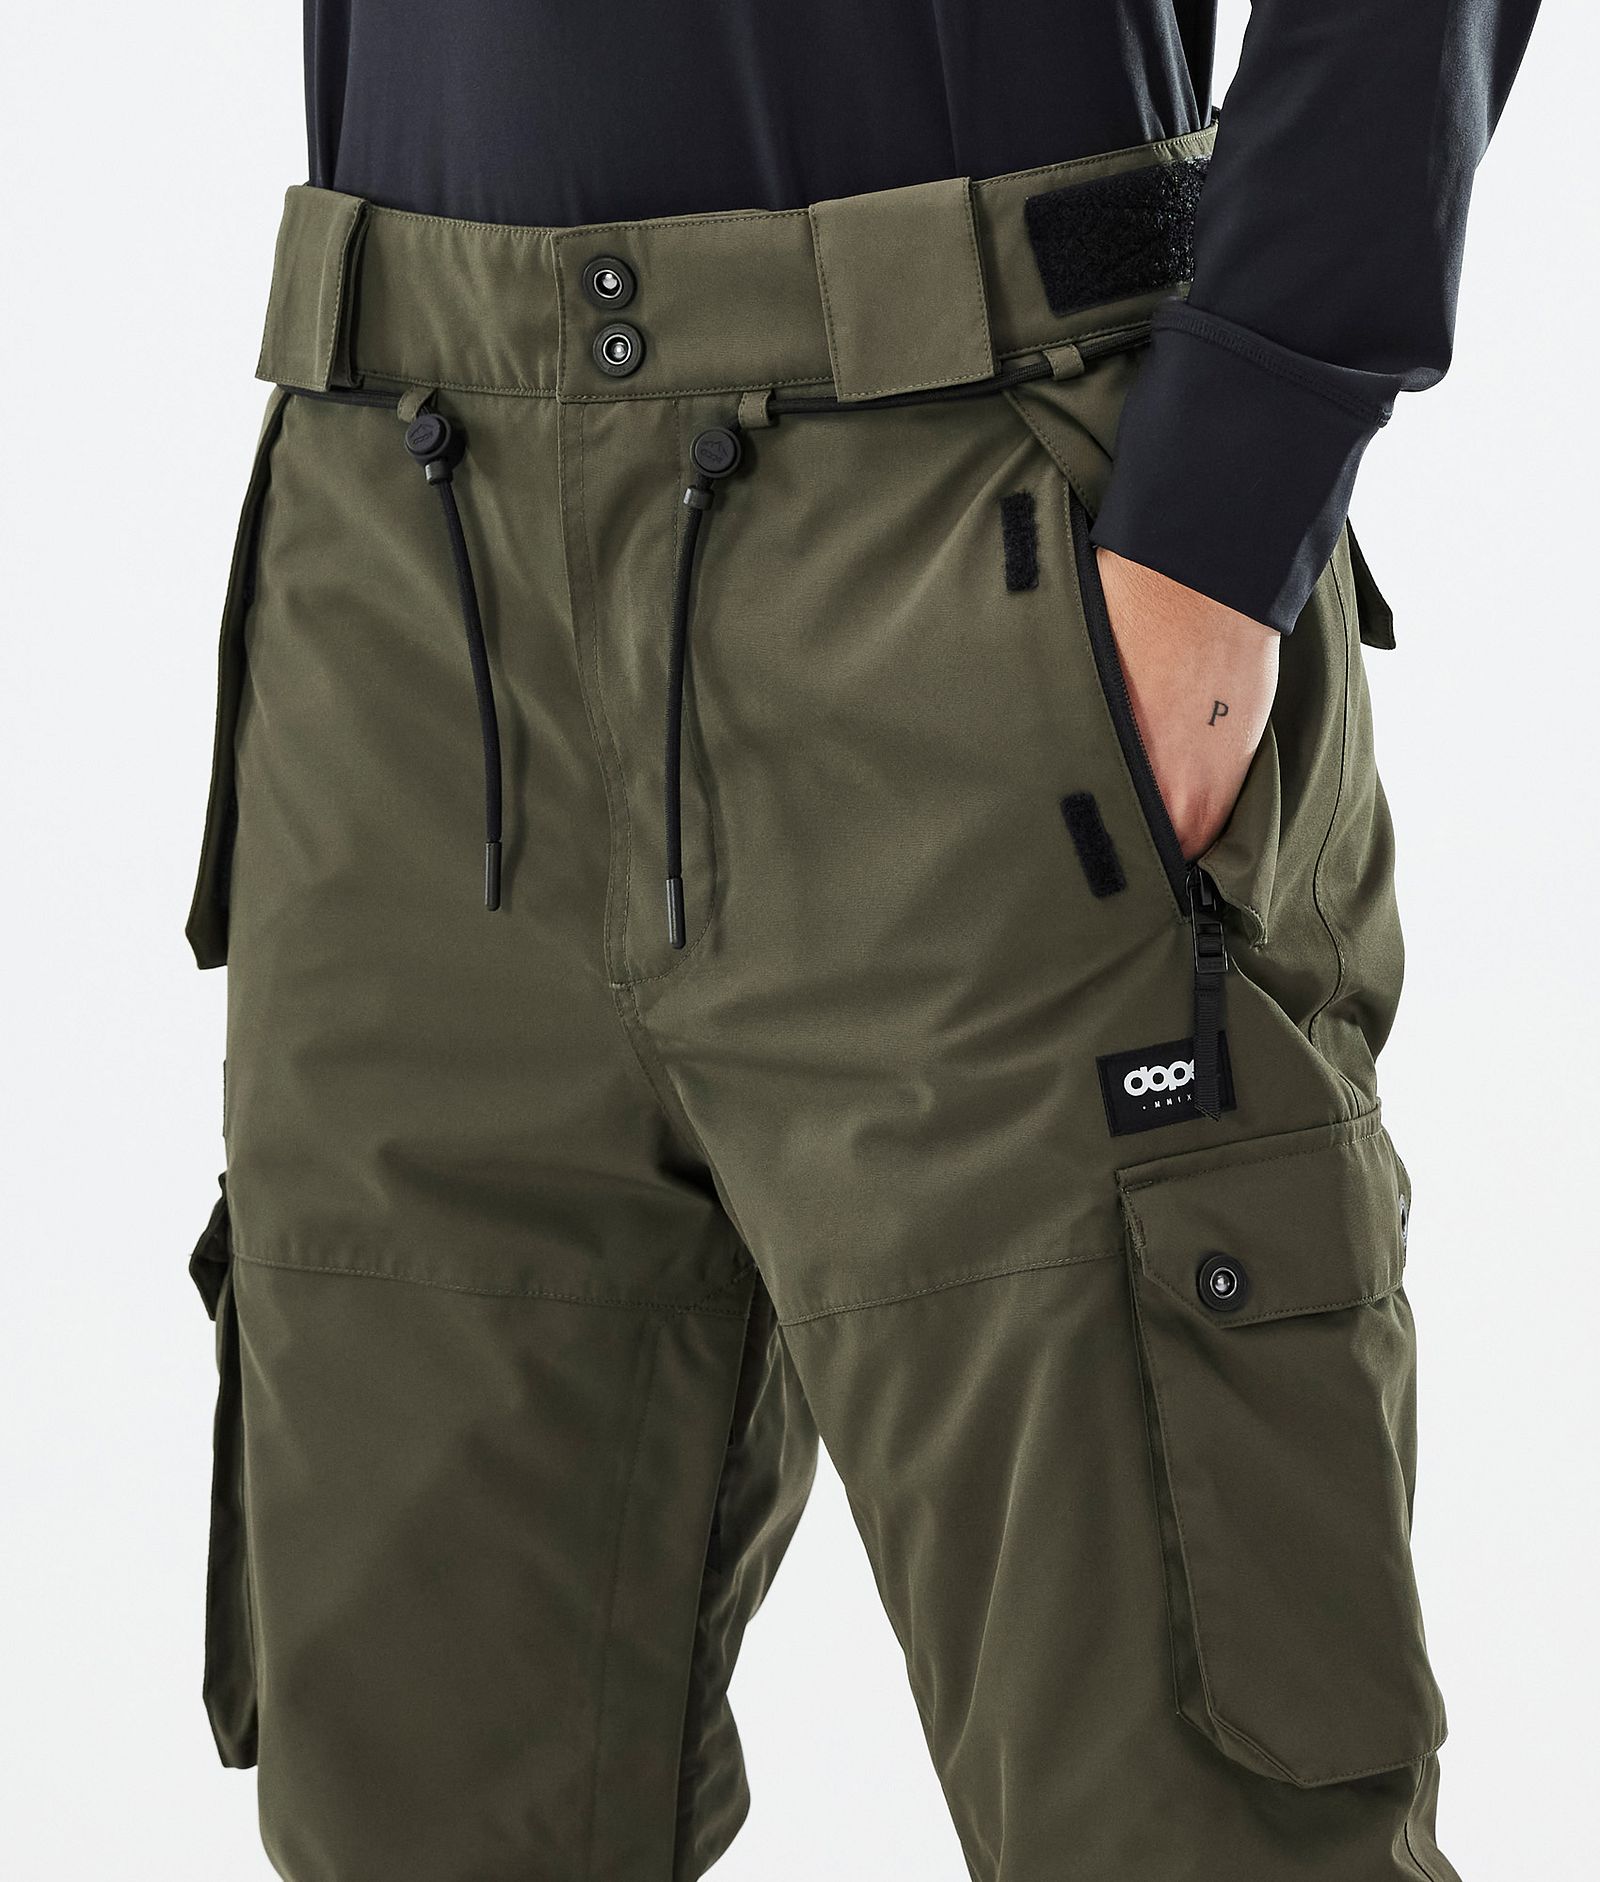 Iconic W Pantalones Esquí Mujer Olive Green